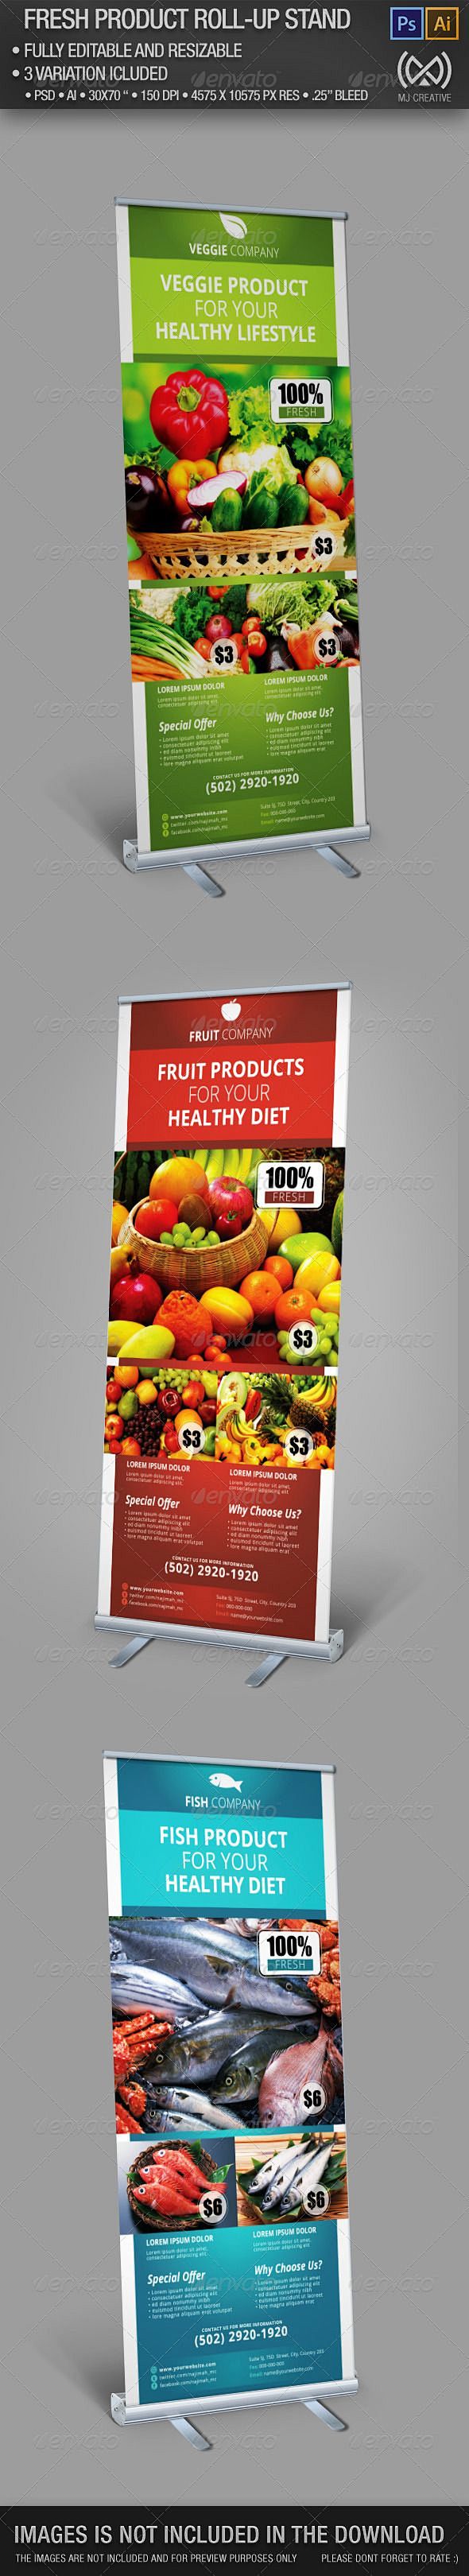 Roll Up Stand Banner